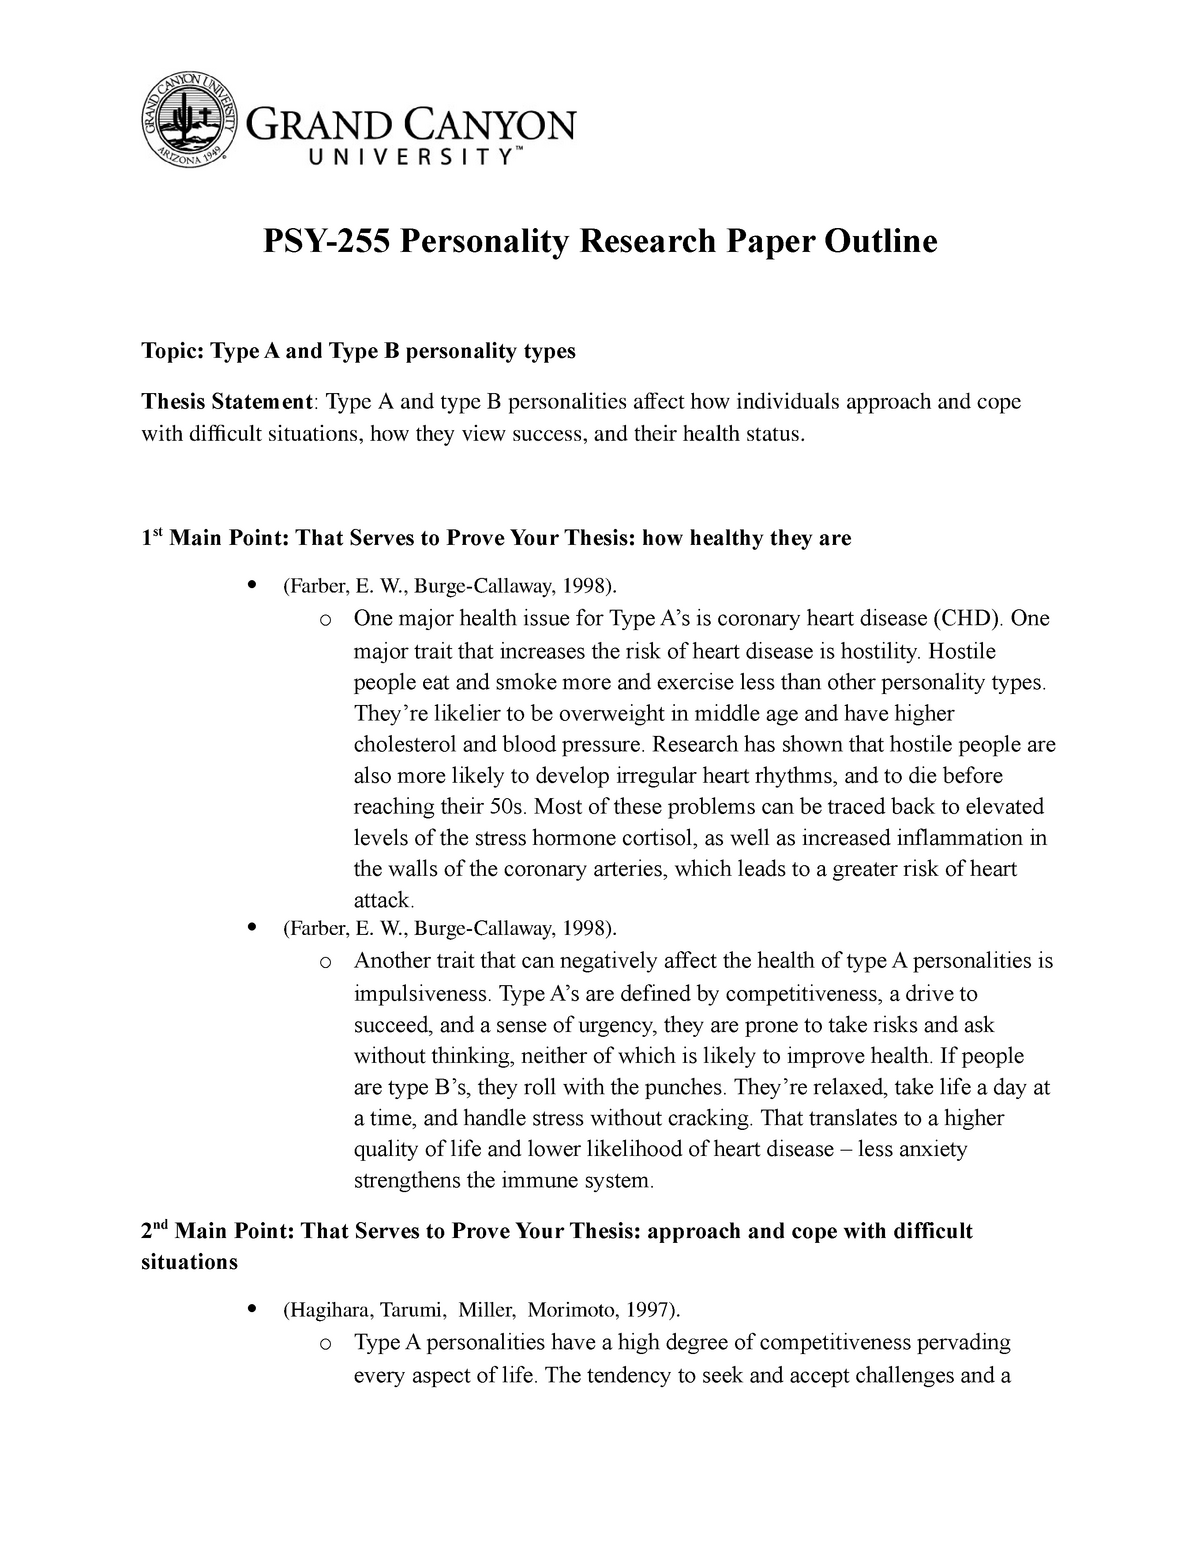 research paper about personality tests